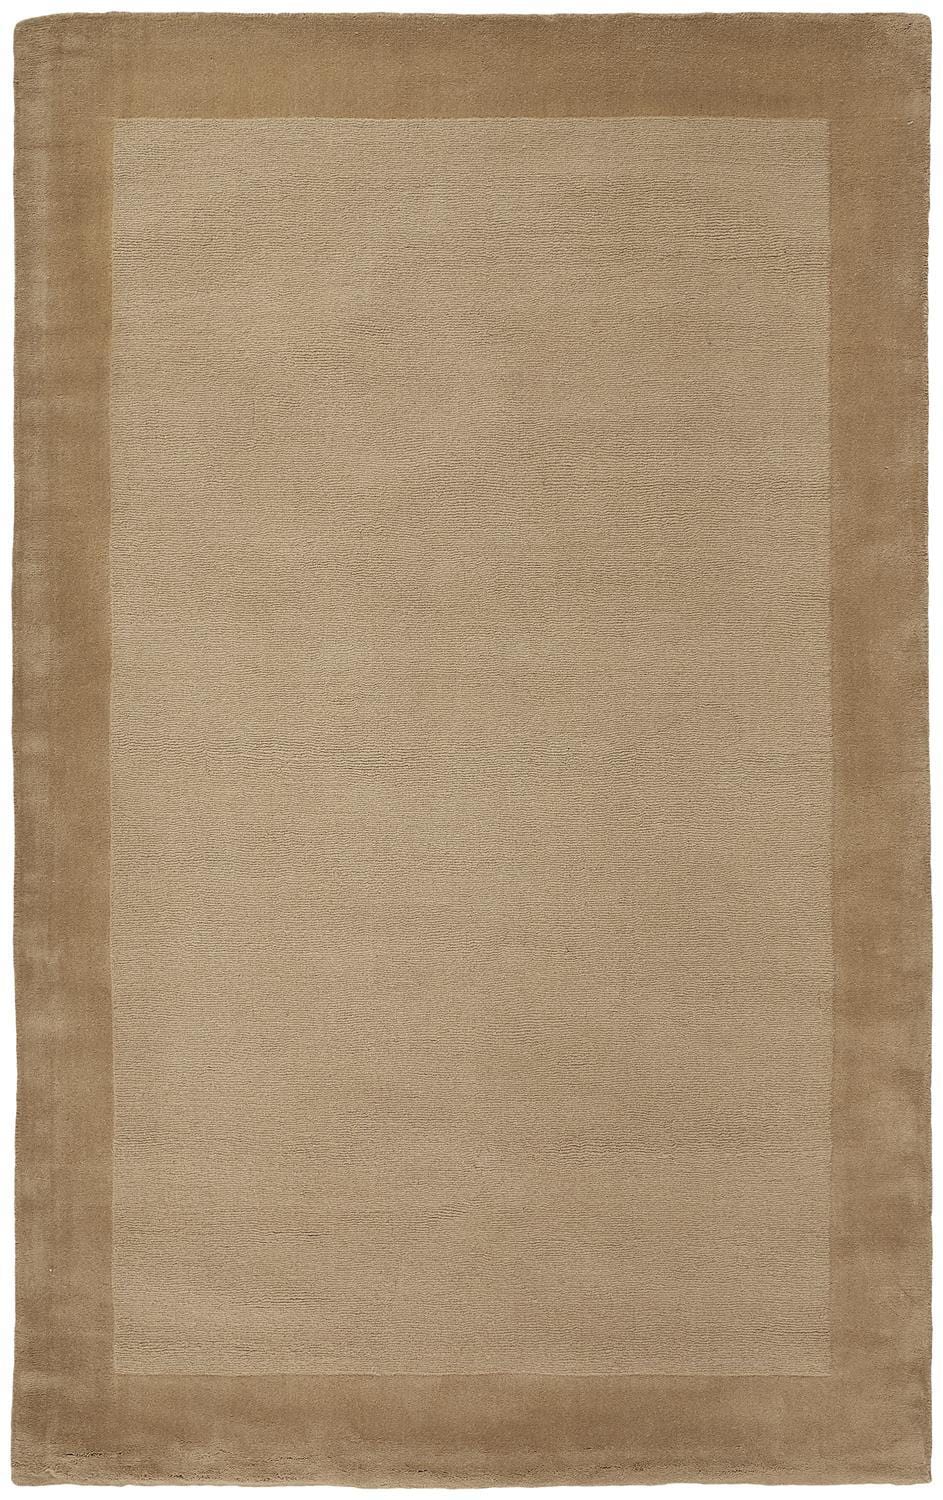 Feizy Feizy Hilson Eco-Friendly Handmade Wool Rug - Latte Tan - Available in 4 Sizes